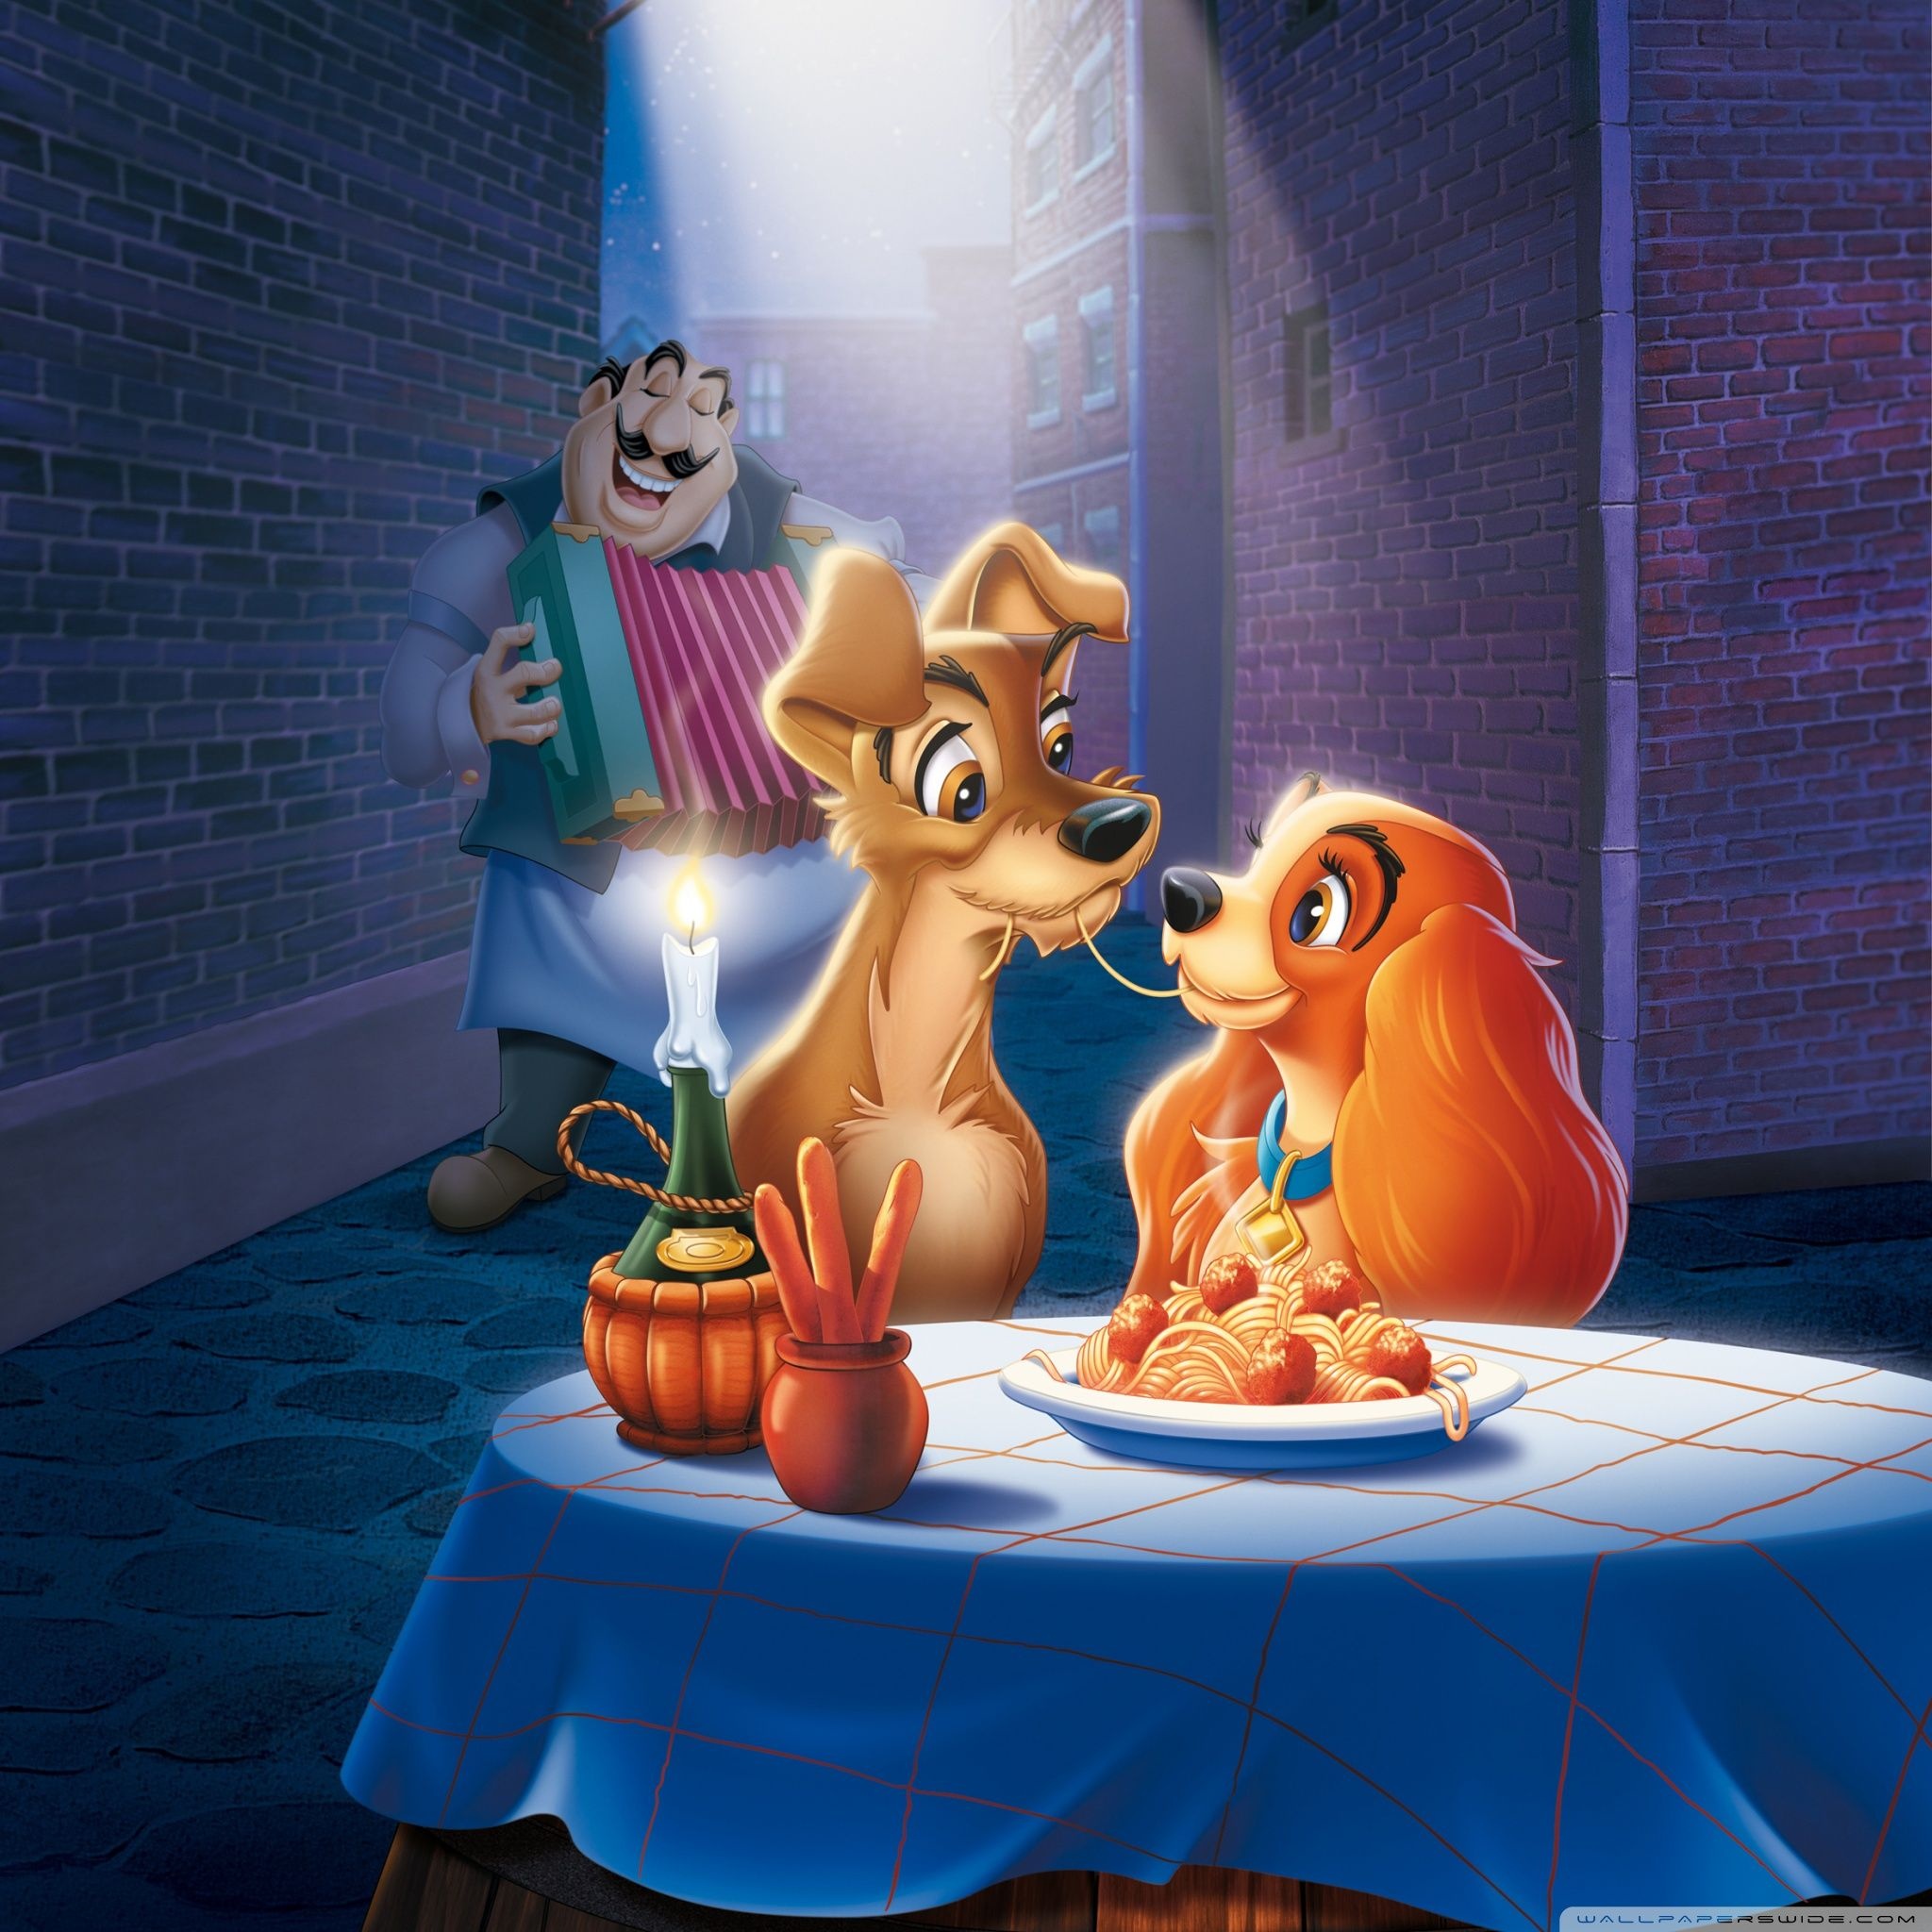 Lady and the Tramp, Top free wallpapers, Iconic Disney backgrounds, Classic animation, 2050x2050 HD Phone